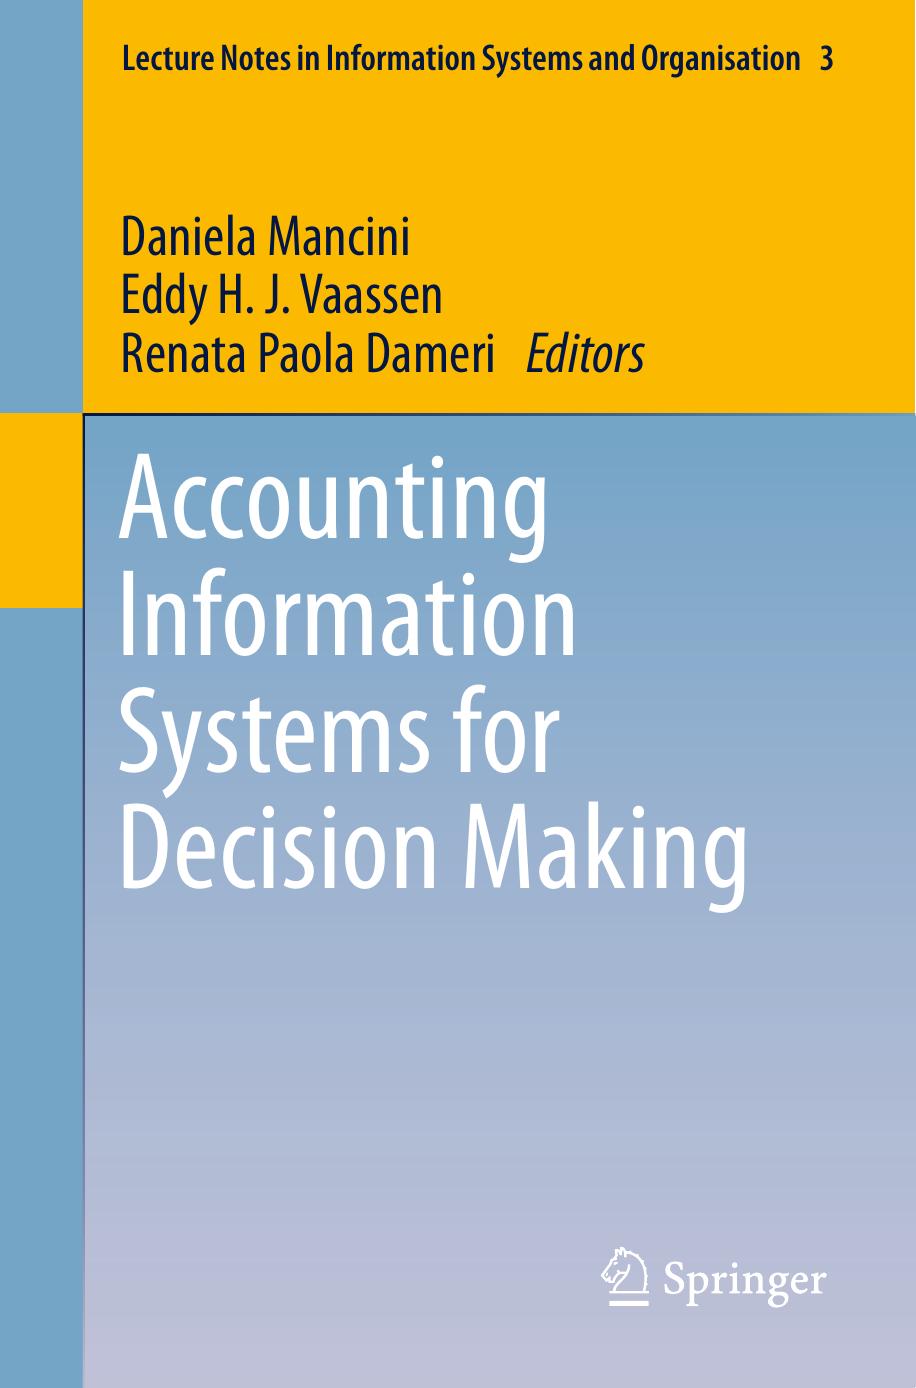 Accounting Information Systems for Decision Making 2013